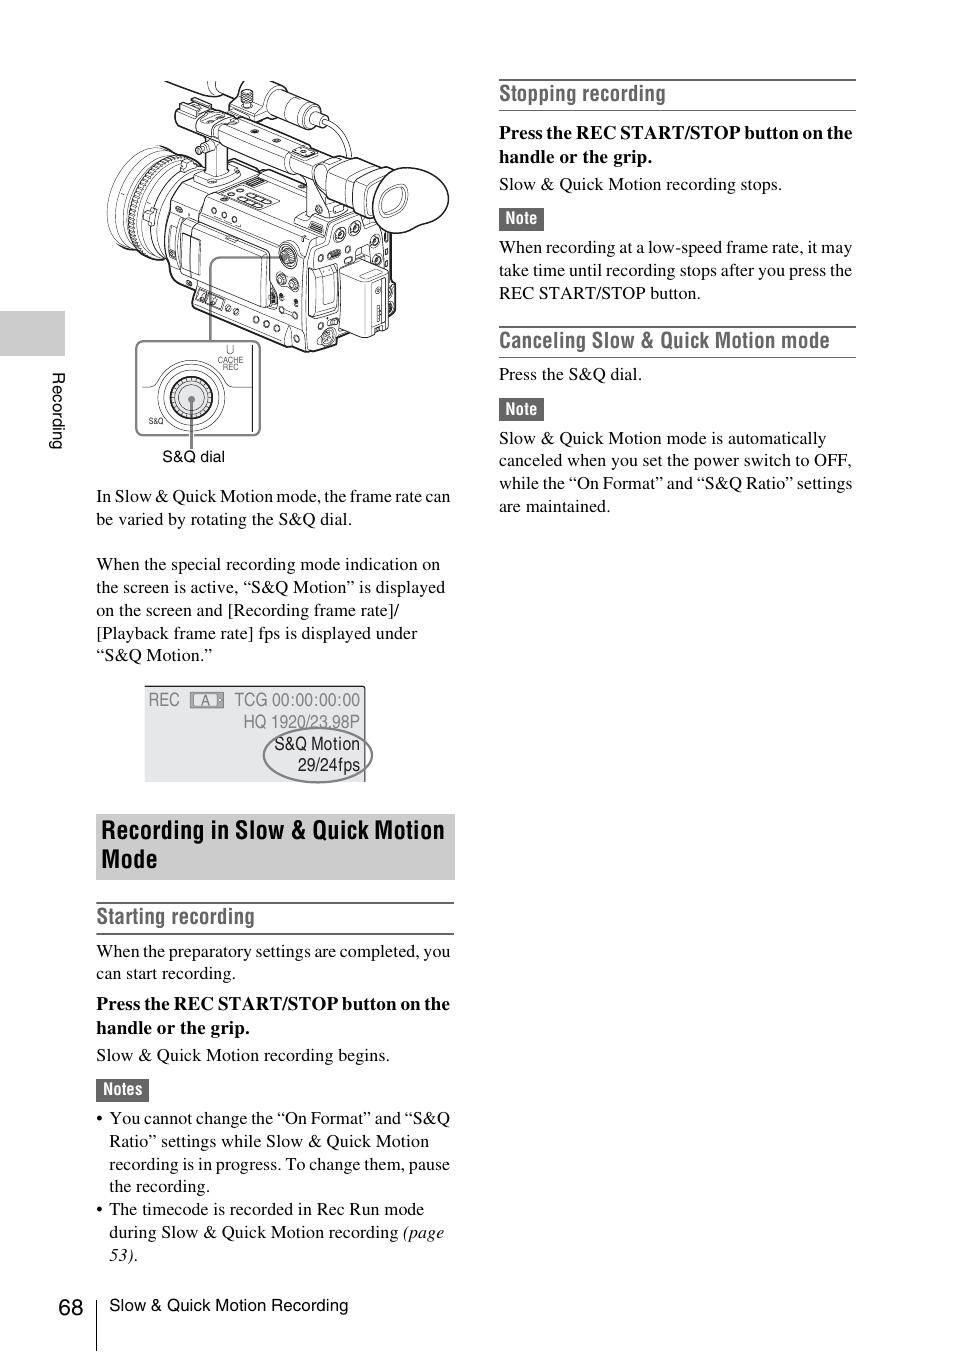 Recording in slow & quick motion mode, Starting recording, Stopping recording | Canceling slow & quick motion mode | Sony PMW-F3K User Manual | Page 68 / 164